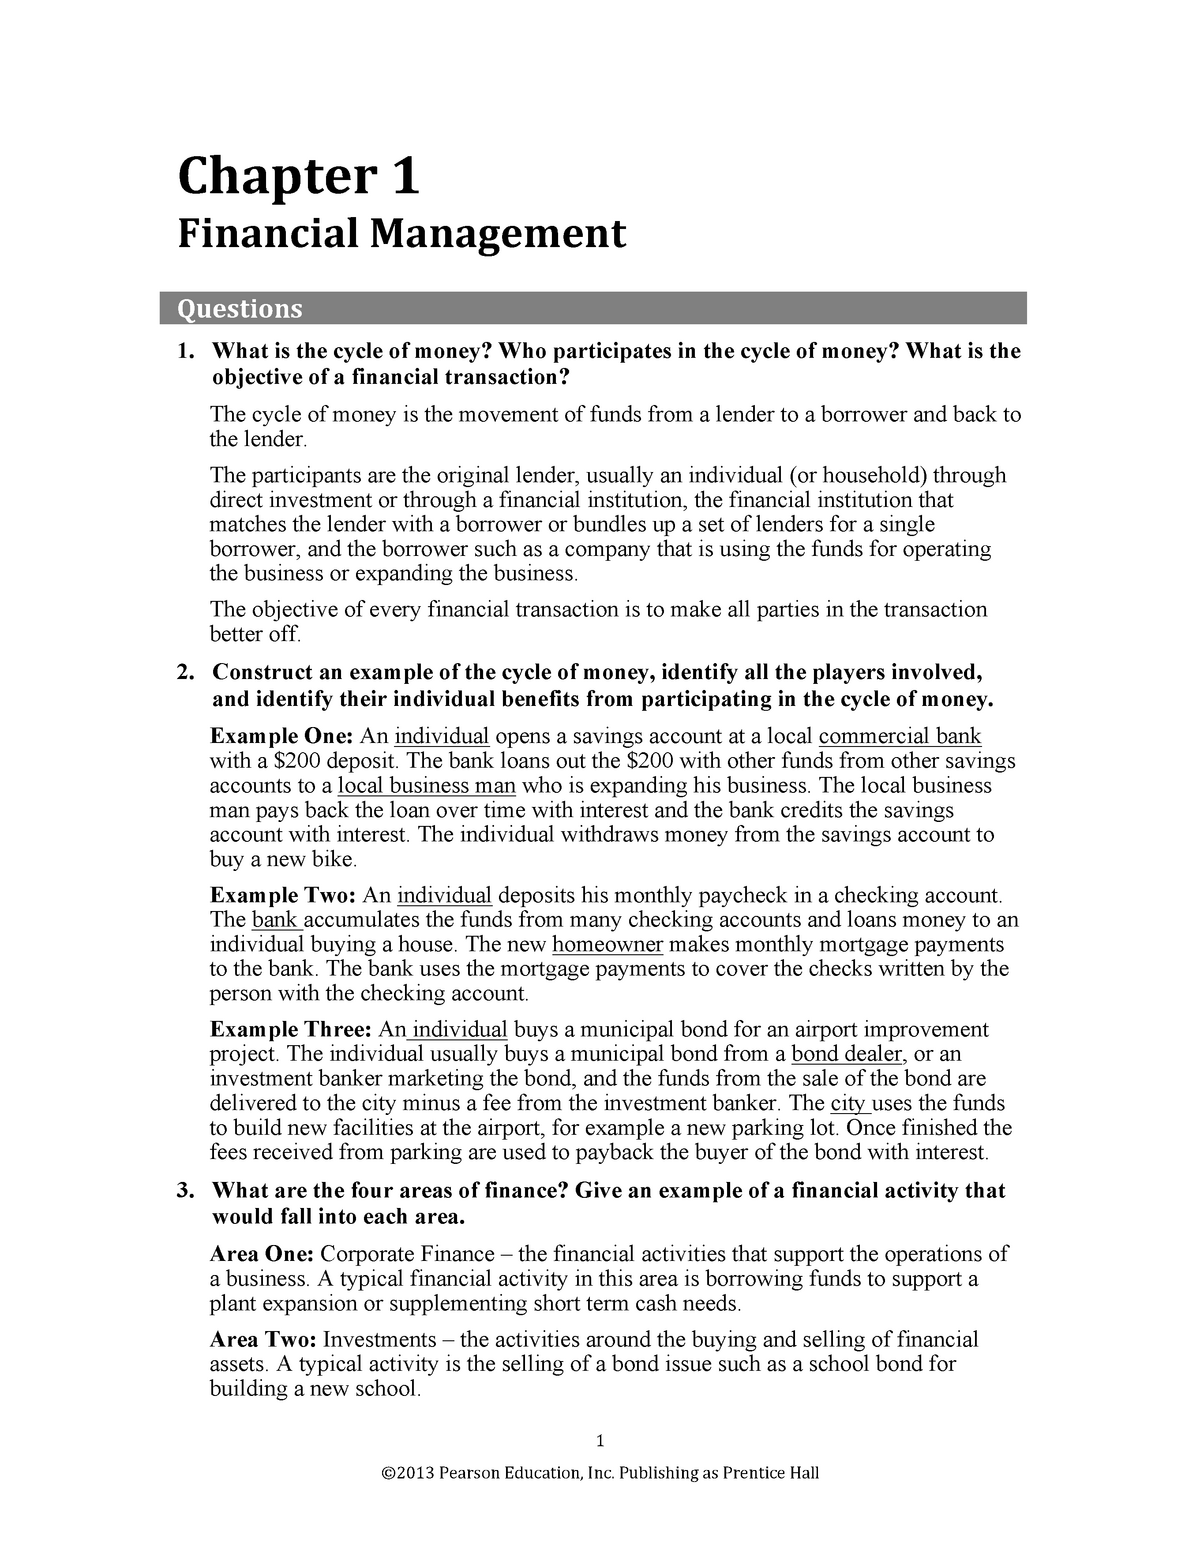 thesis in financial management